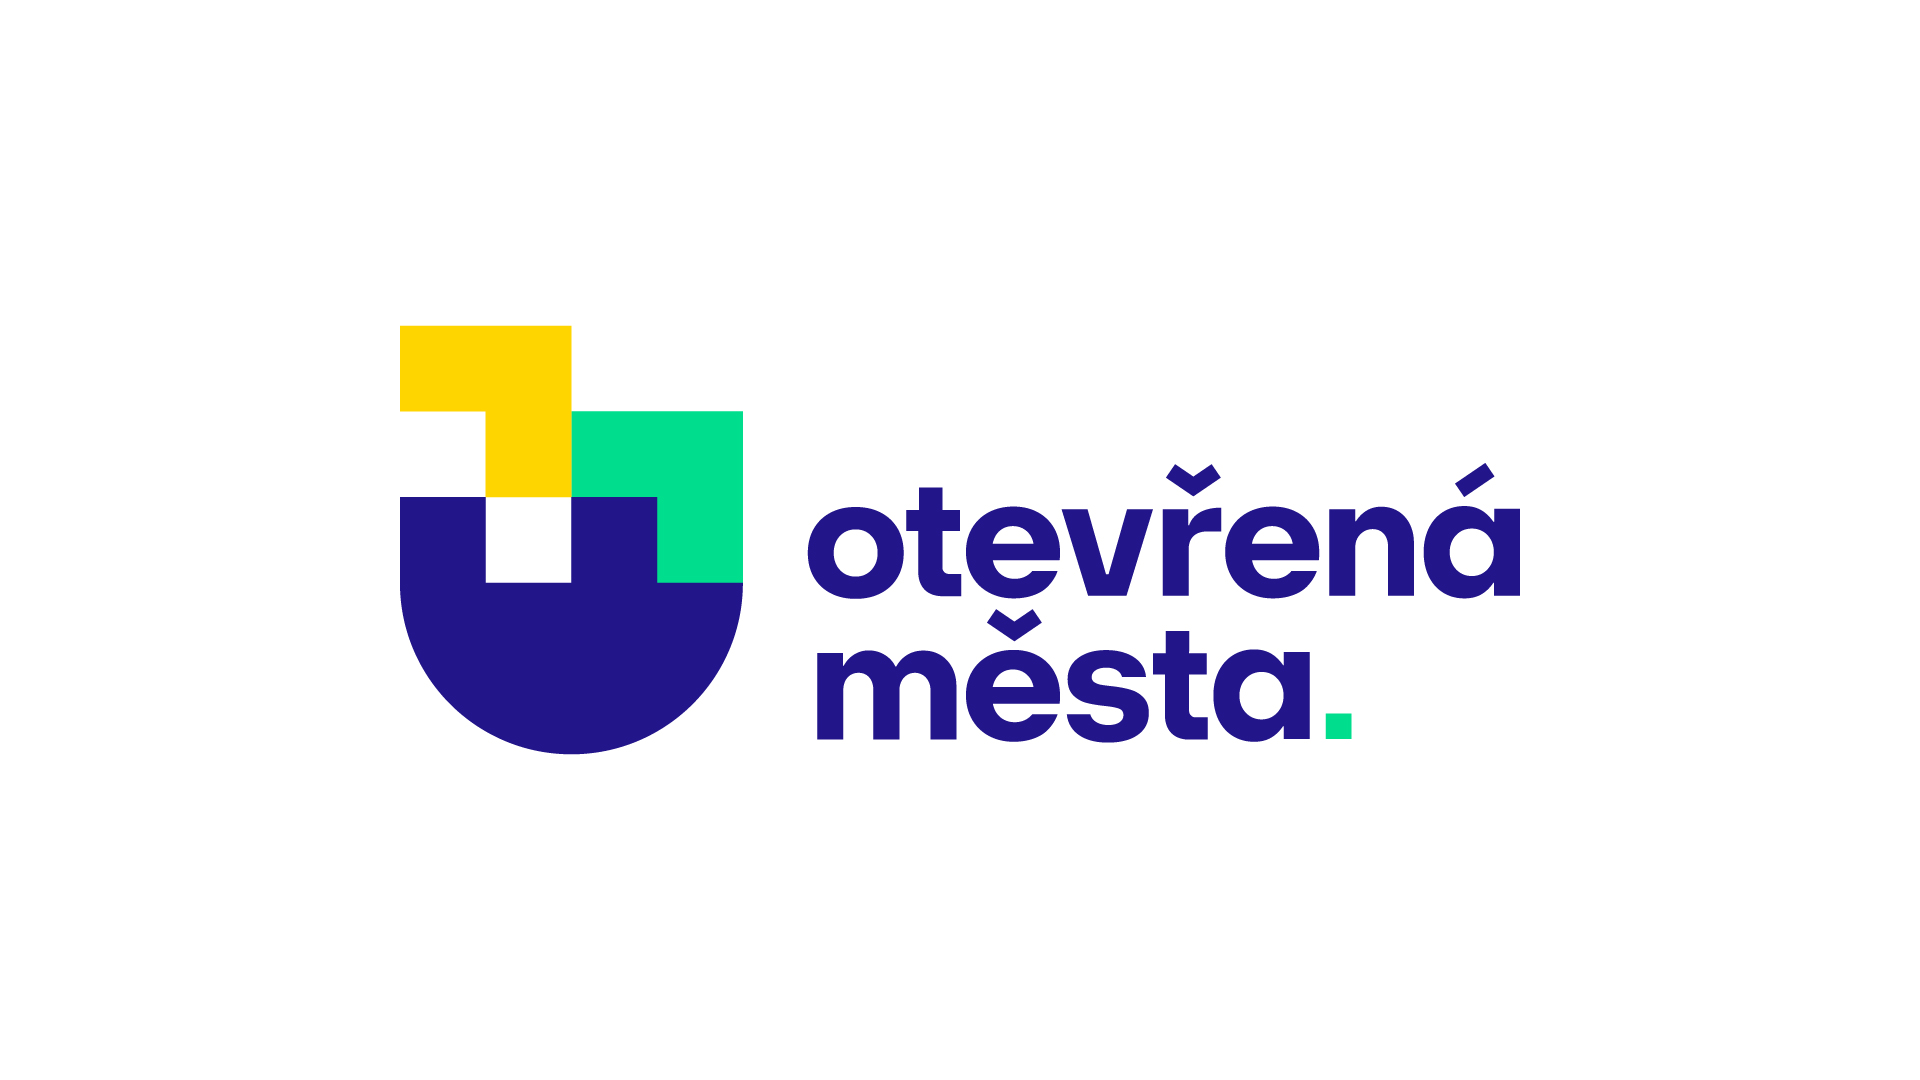 To the left, a dark blue/yellow/green logo composed of puzzle-like pieces. To the right, the text reads "Otevřená města."